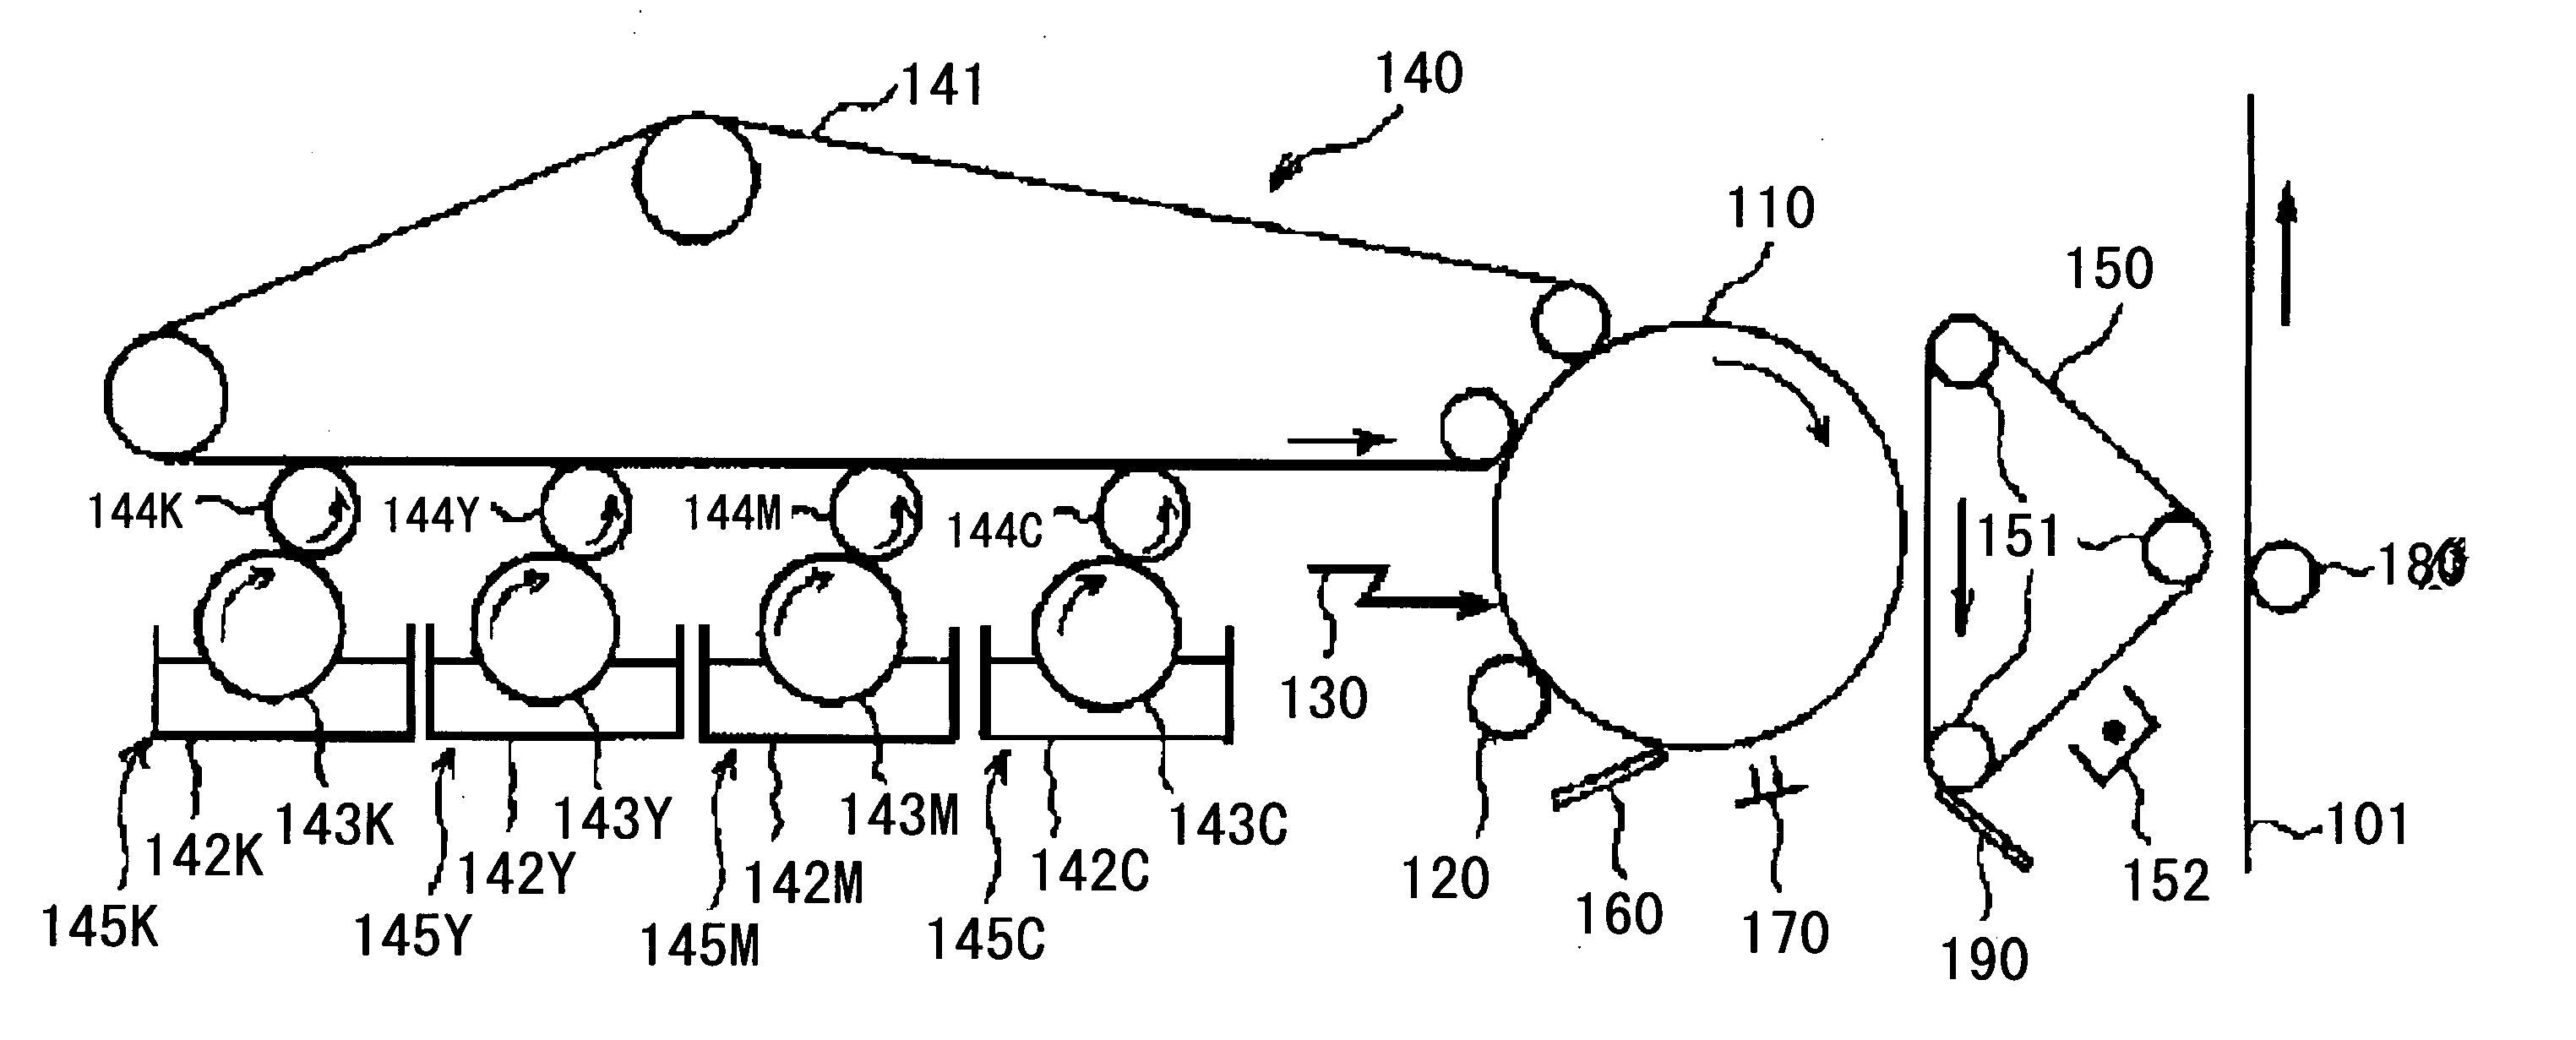 Electrophotography and image forming apparatus